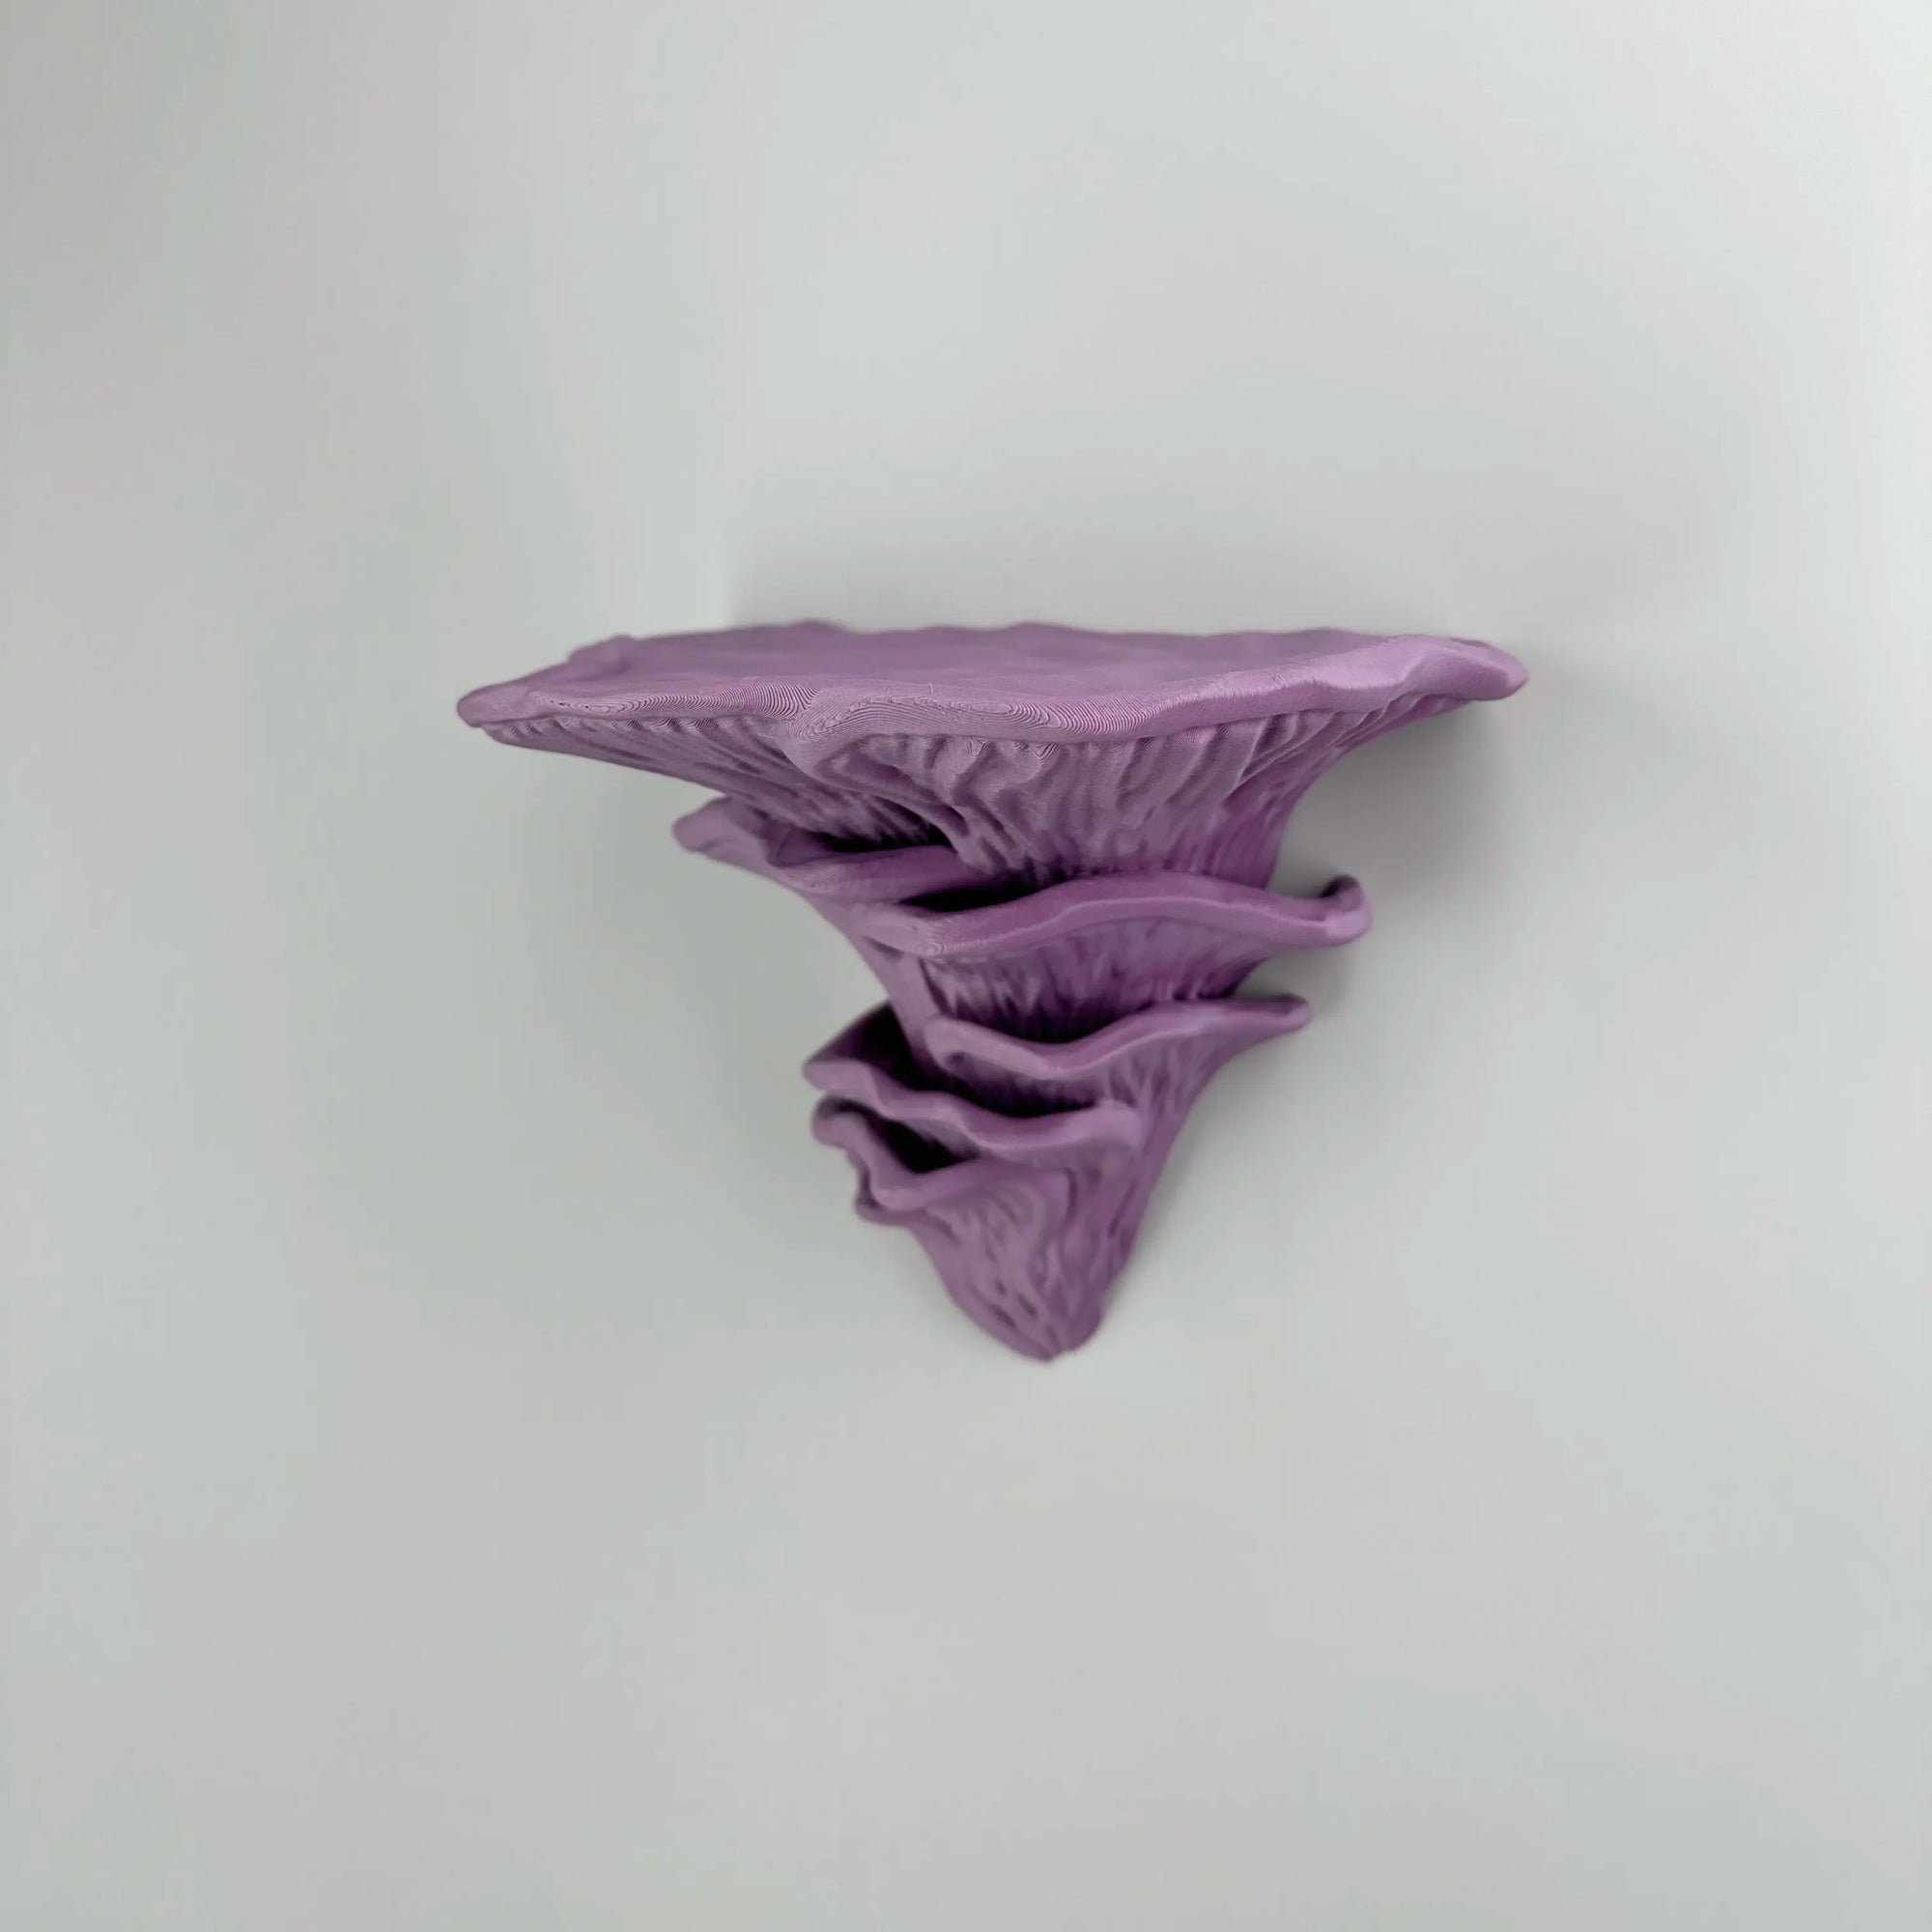  Djamor Fungus Wall Shelf mounted in a living room with decorative items. Muted Purple color.